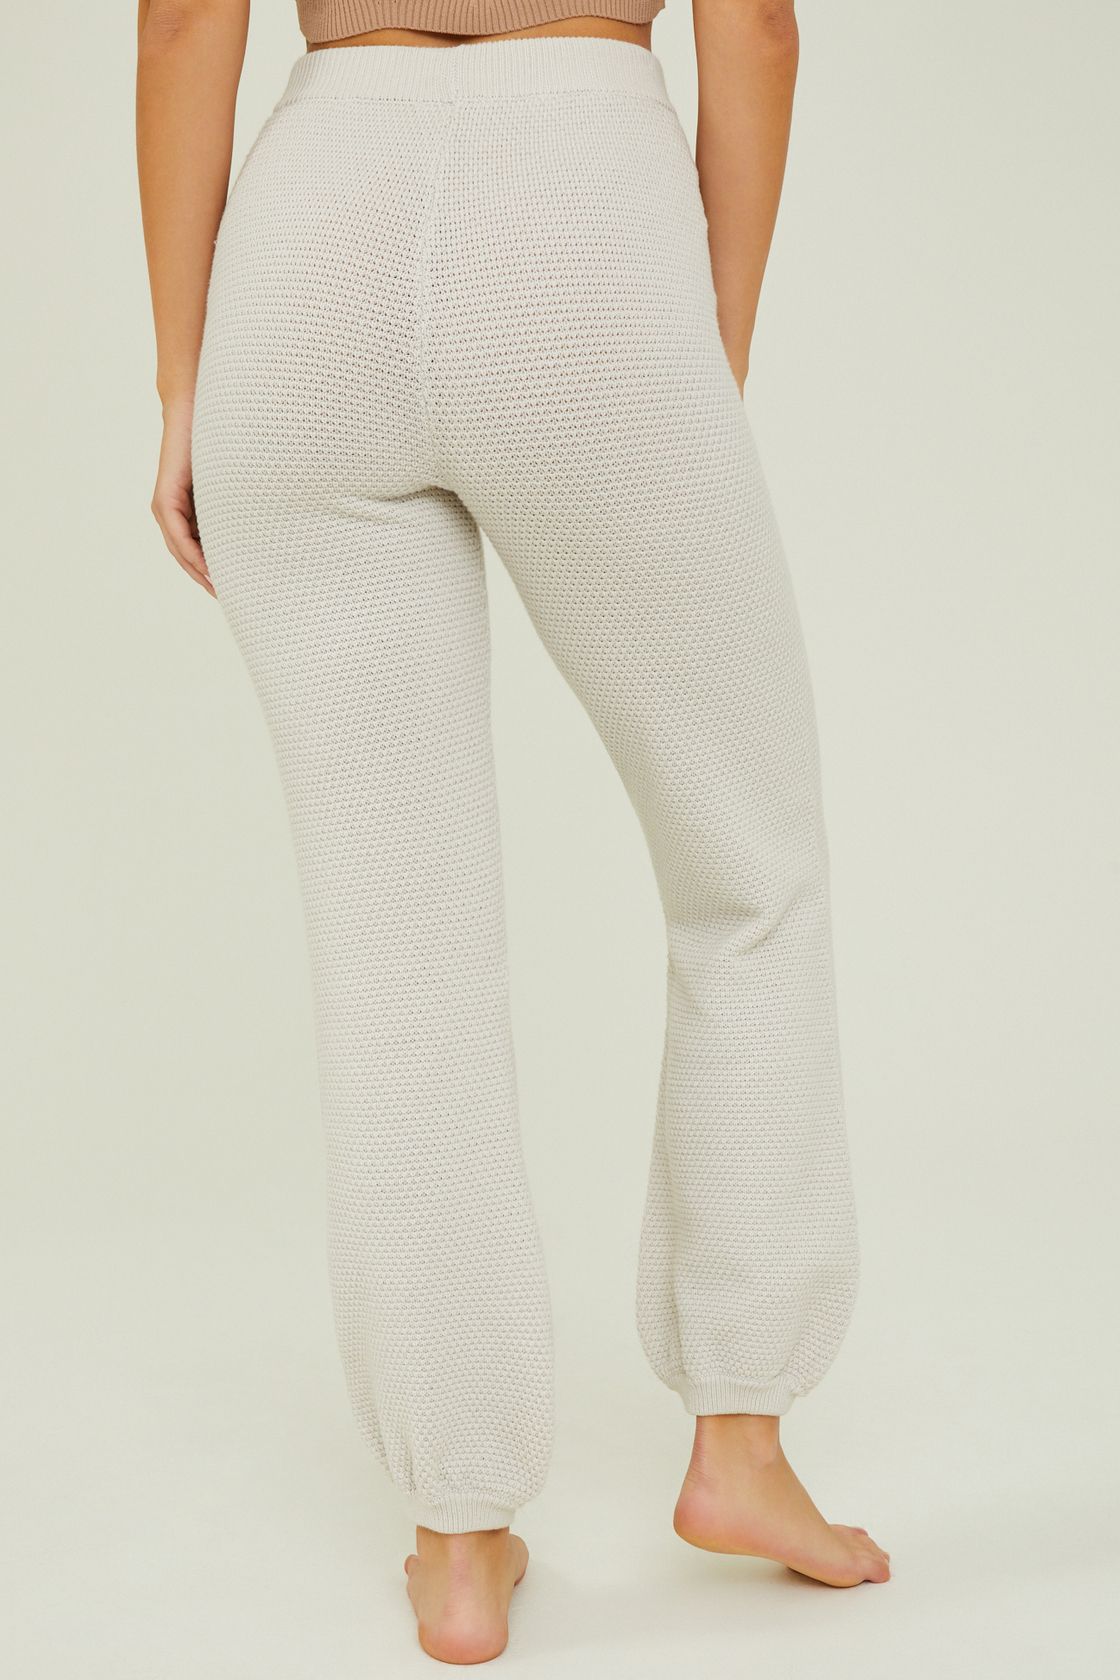 Hailey Lounge Pants in Ivory | Altar'd State | Altar'd State